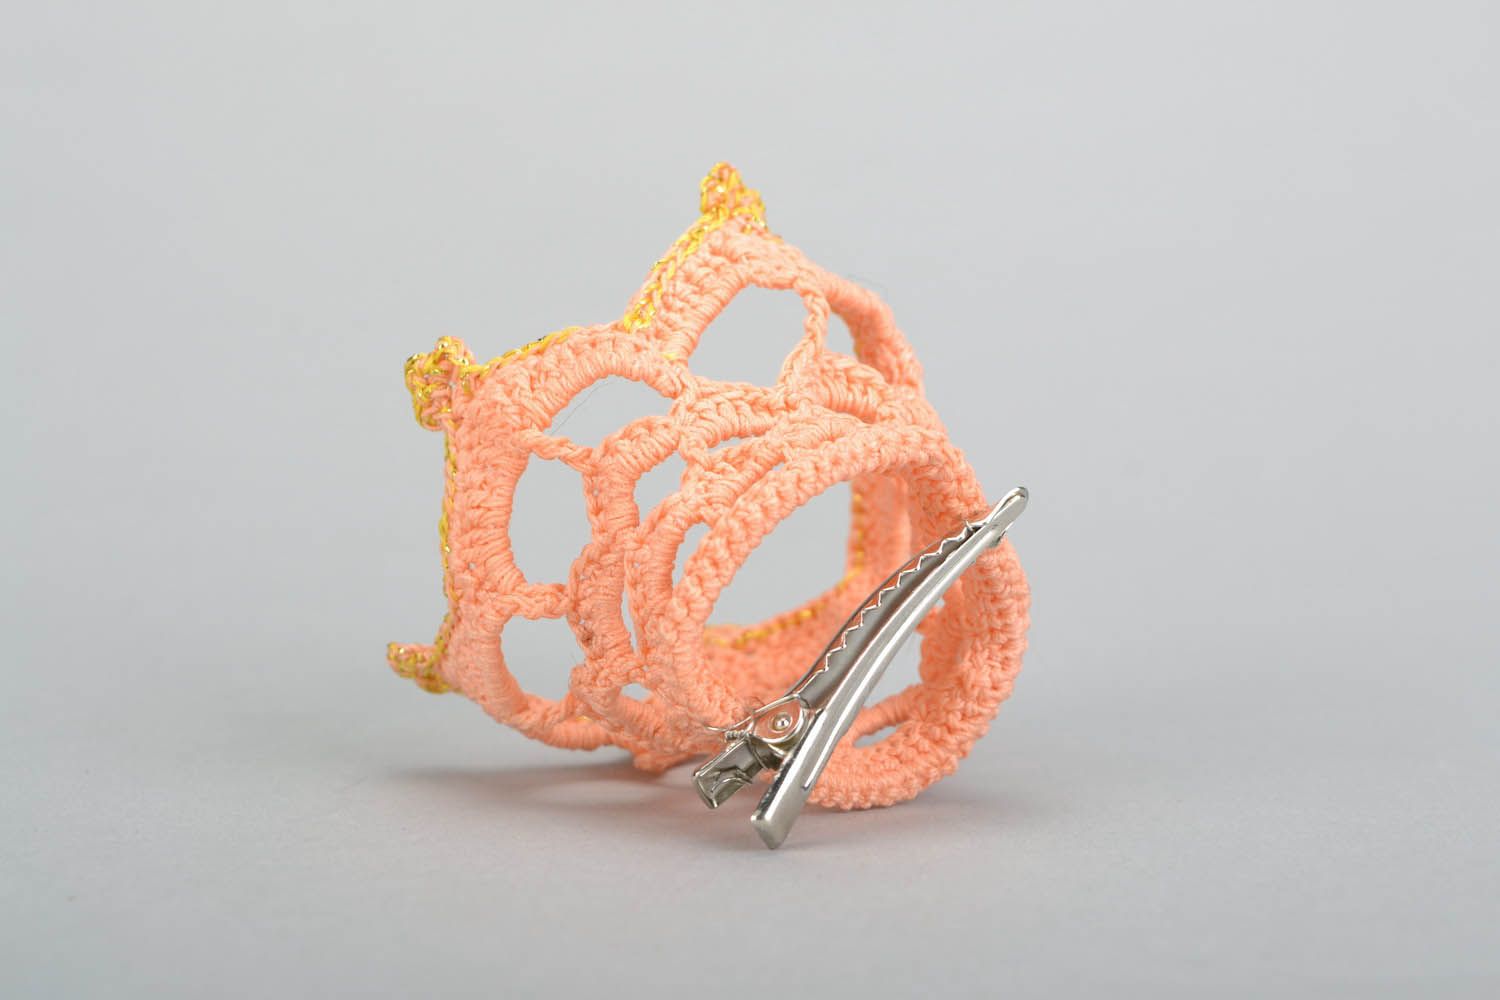 Crocheted hairpin in the shape of a crown photo 5